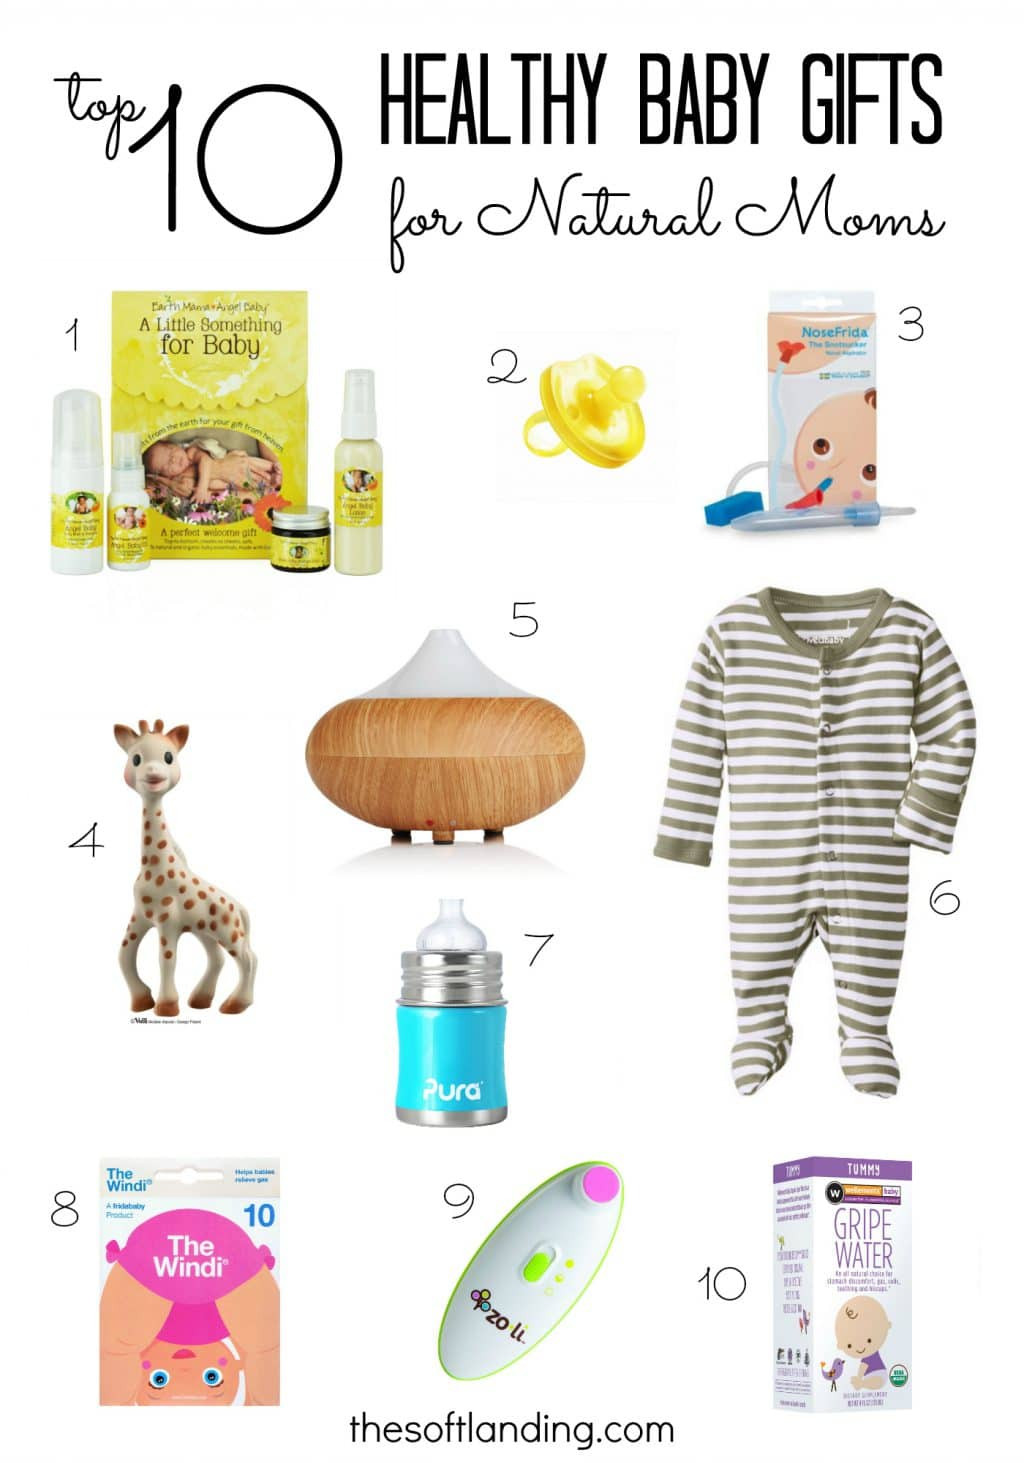 Top 10 Baby Shower Gifts
 Top 10 Healthy Baby Gifts for Natural Moms